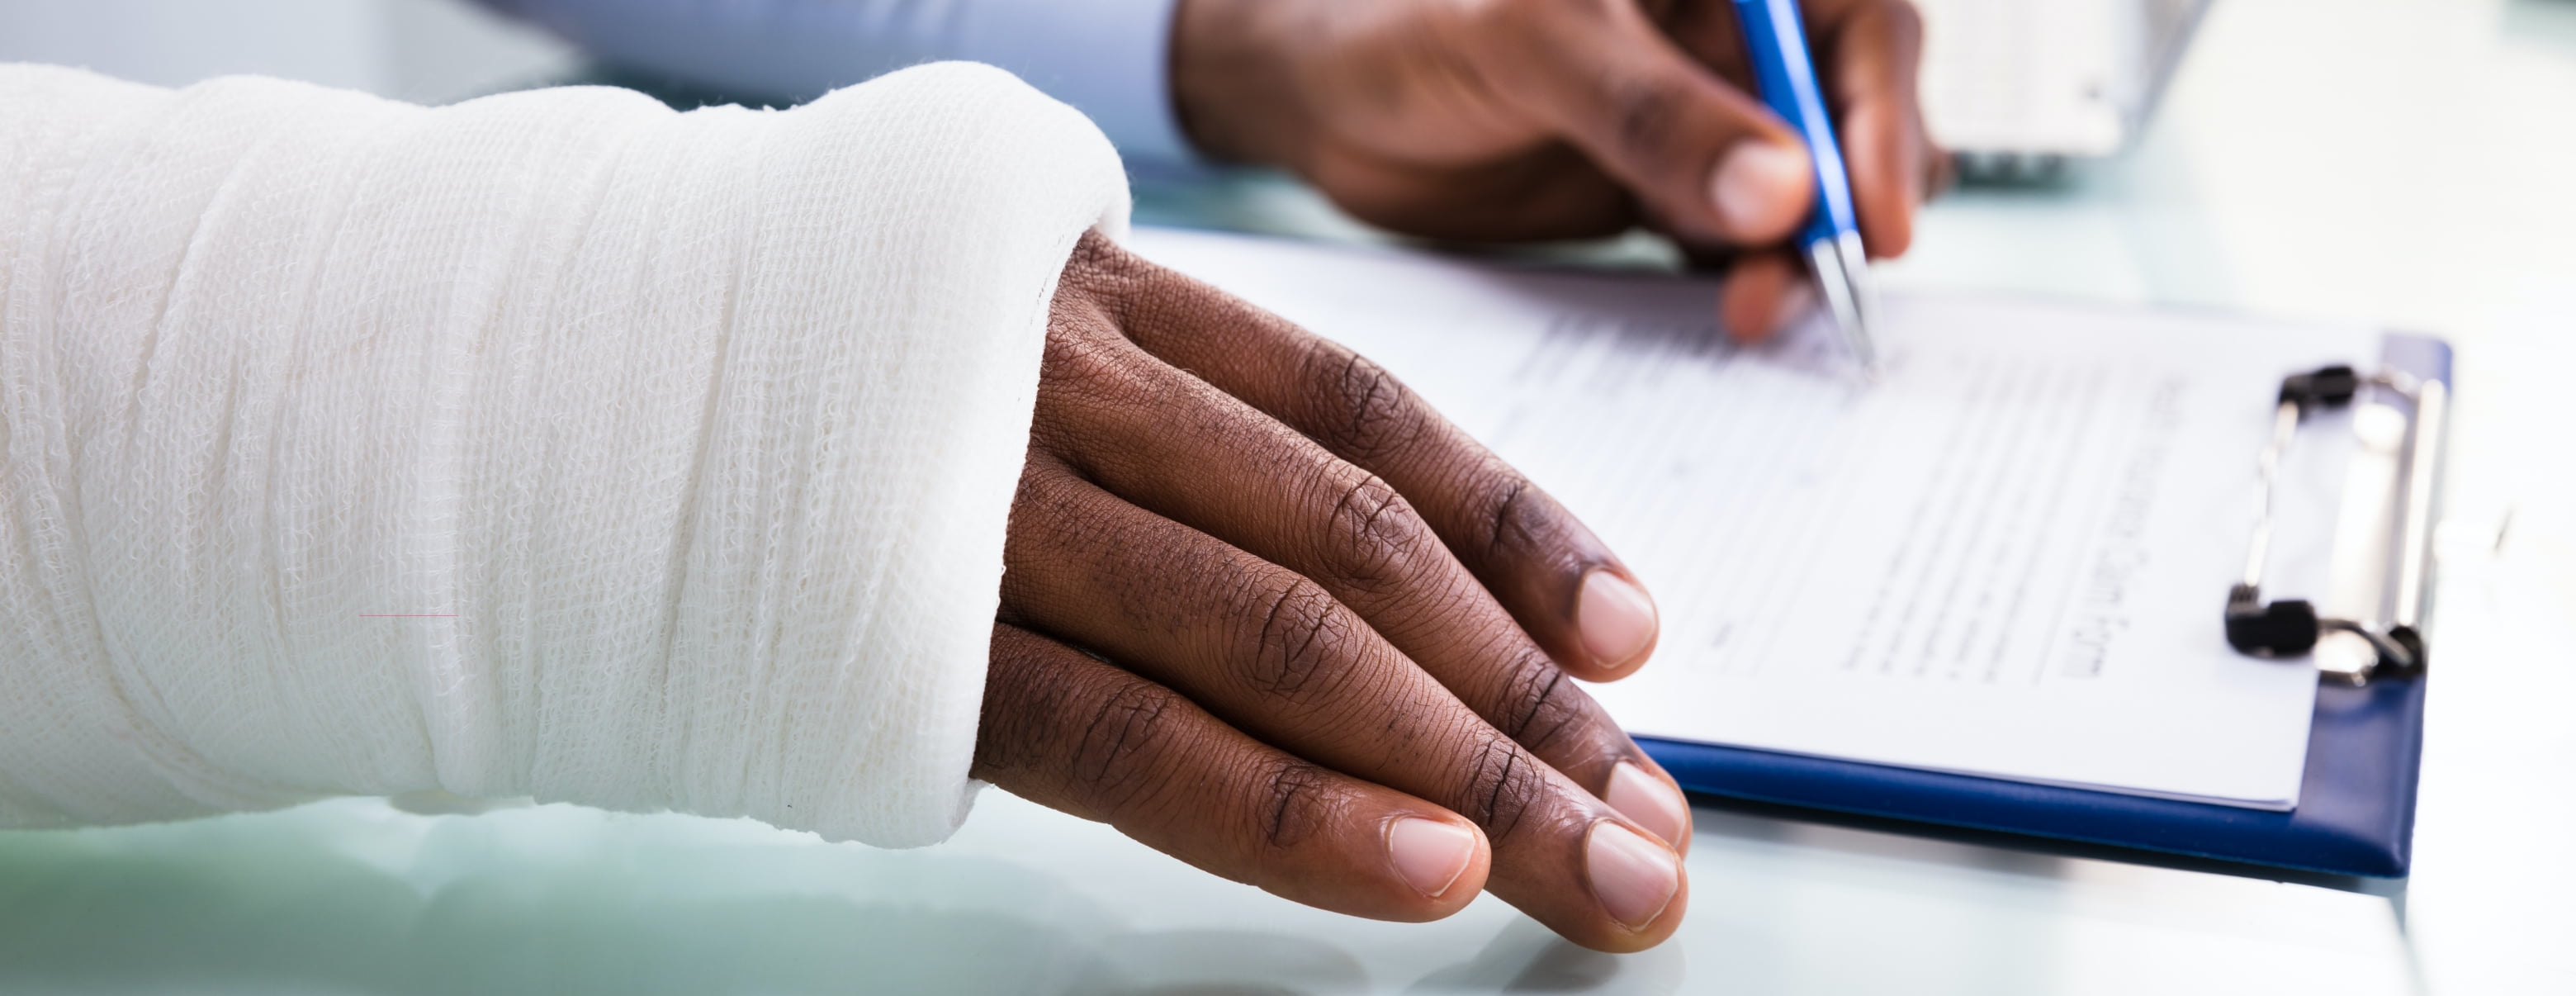 Injured employee with hand in cast - workers' compensation Arizona